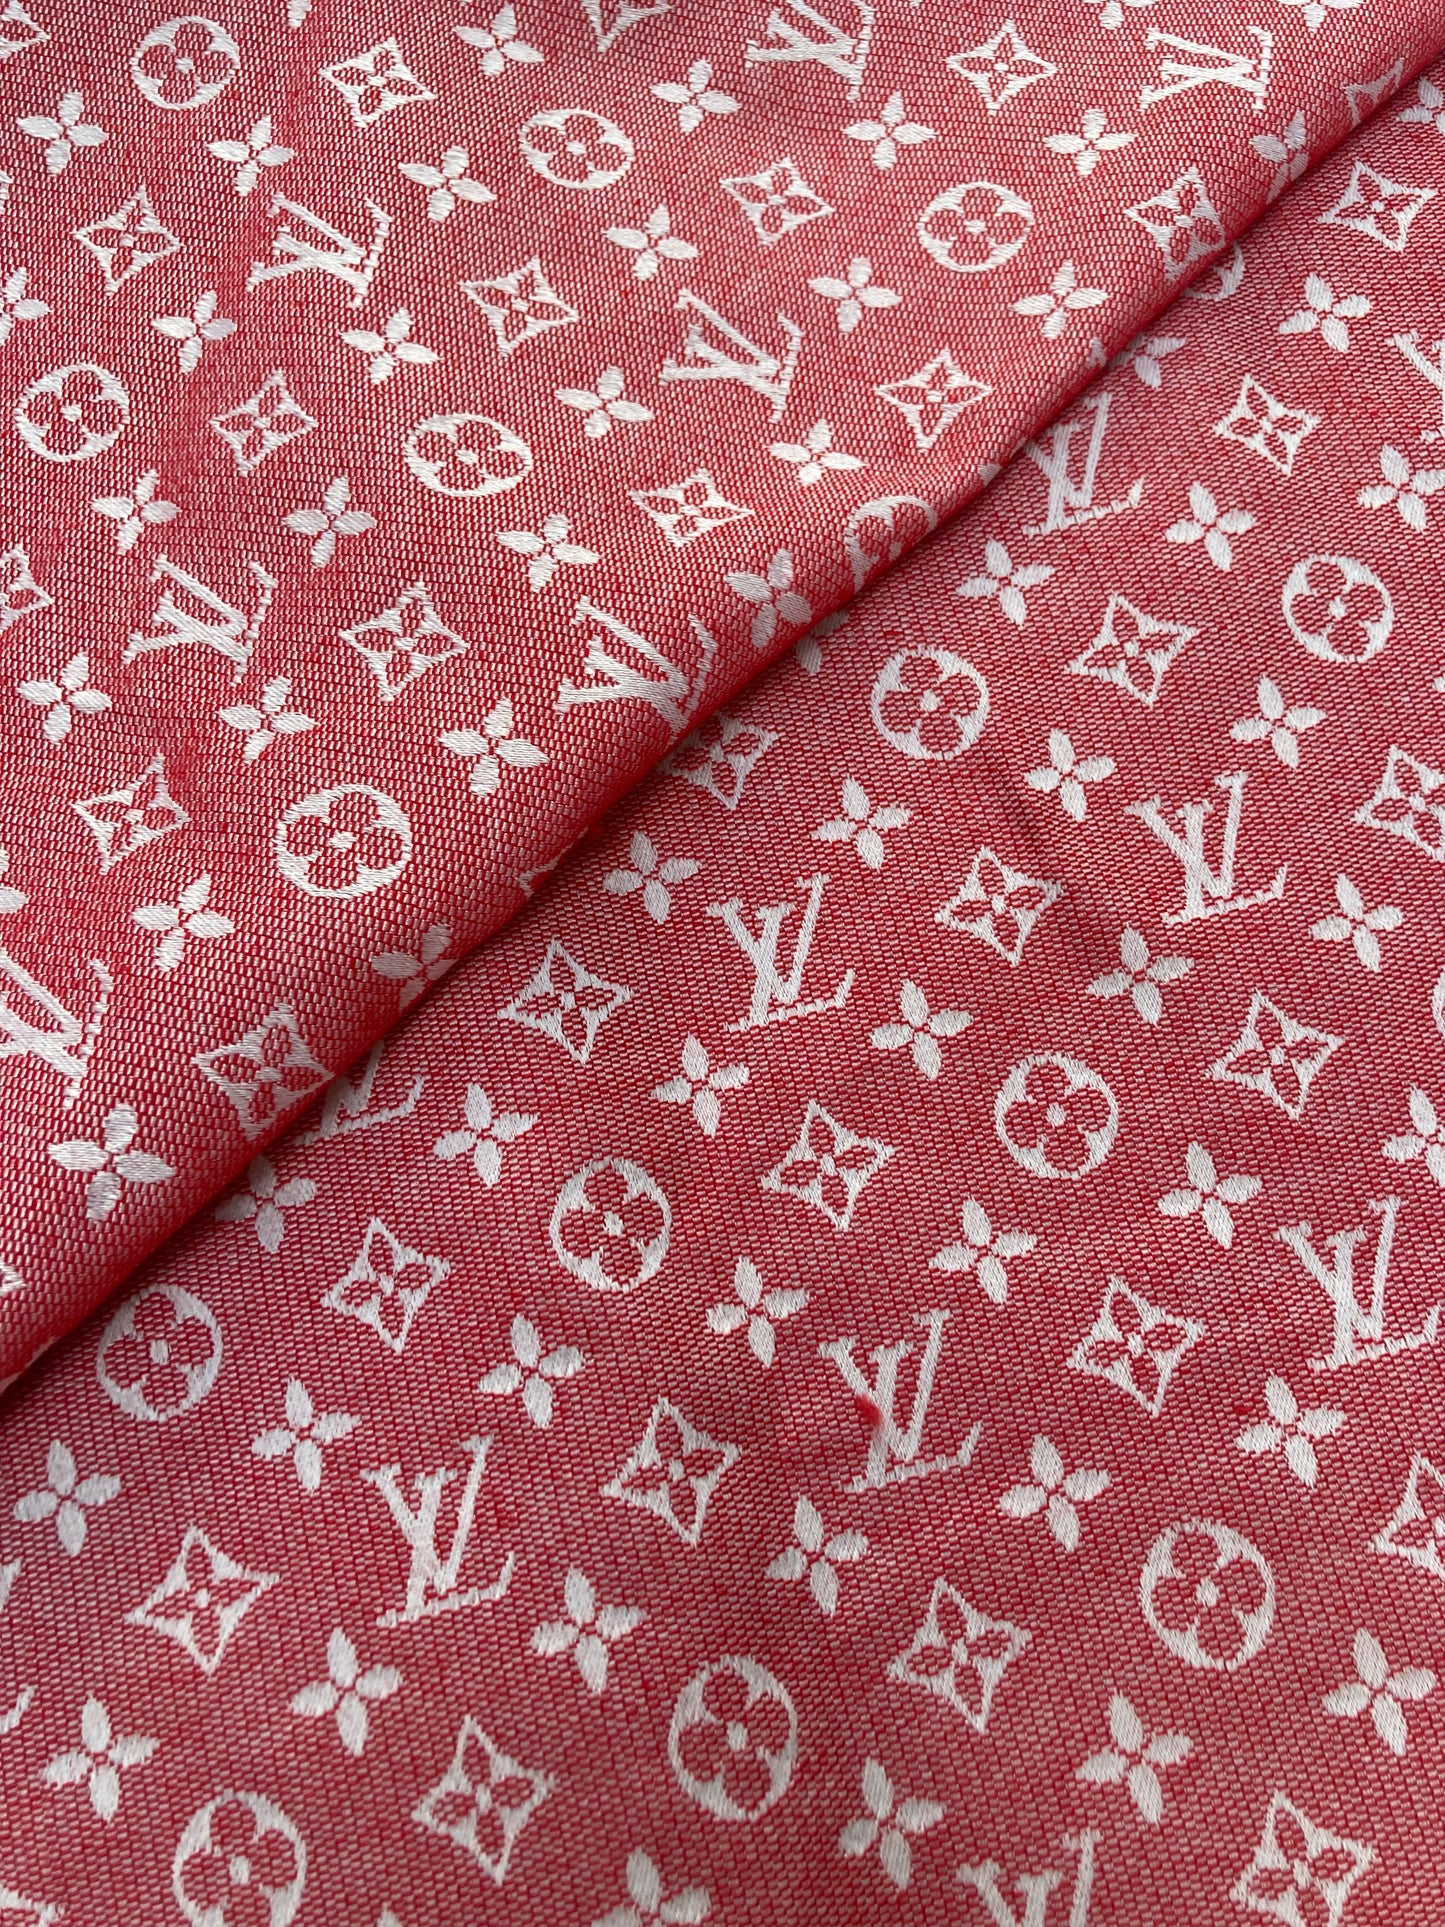 Red Cotton Jacquard LV Crafts Fabric for Handmade